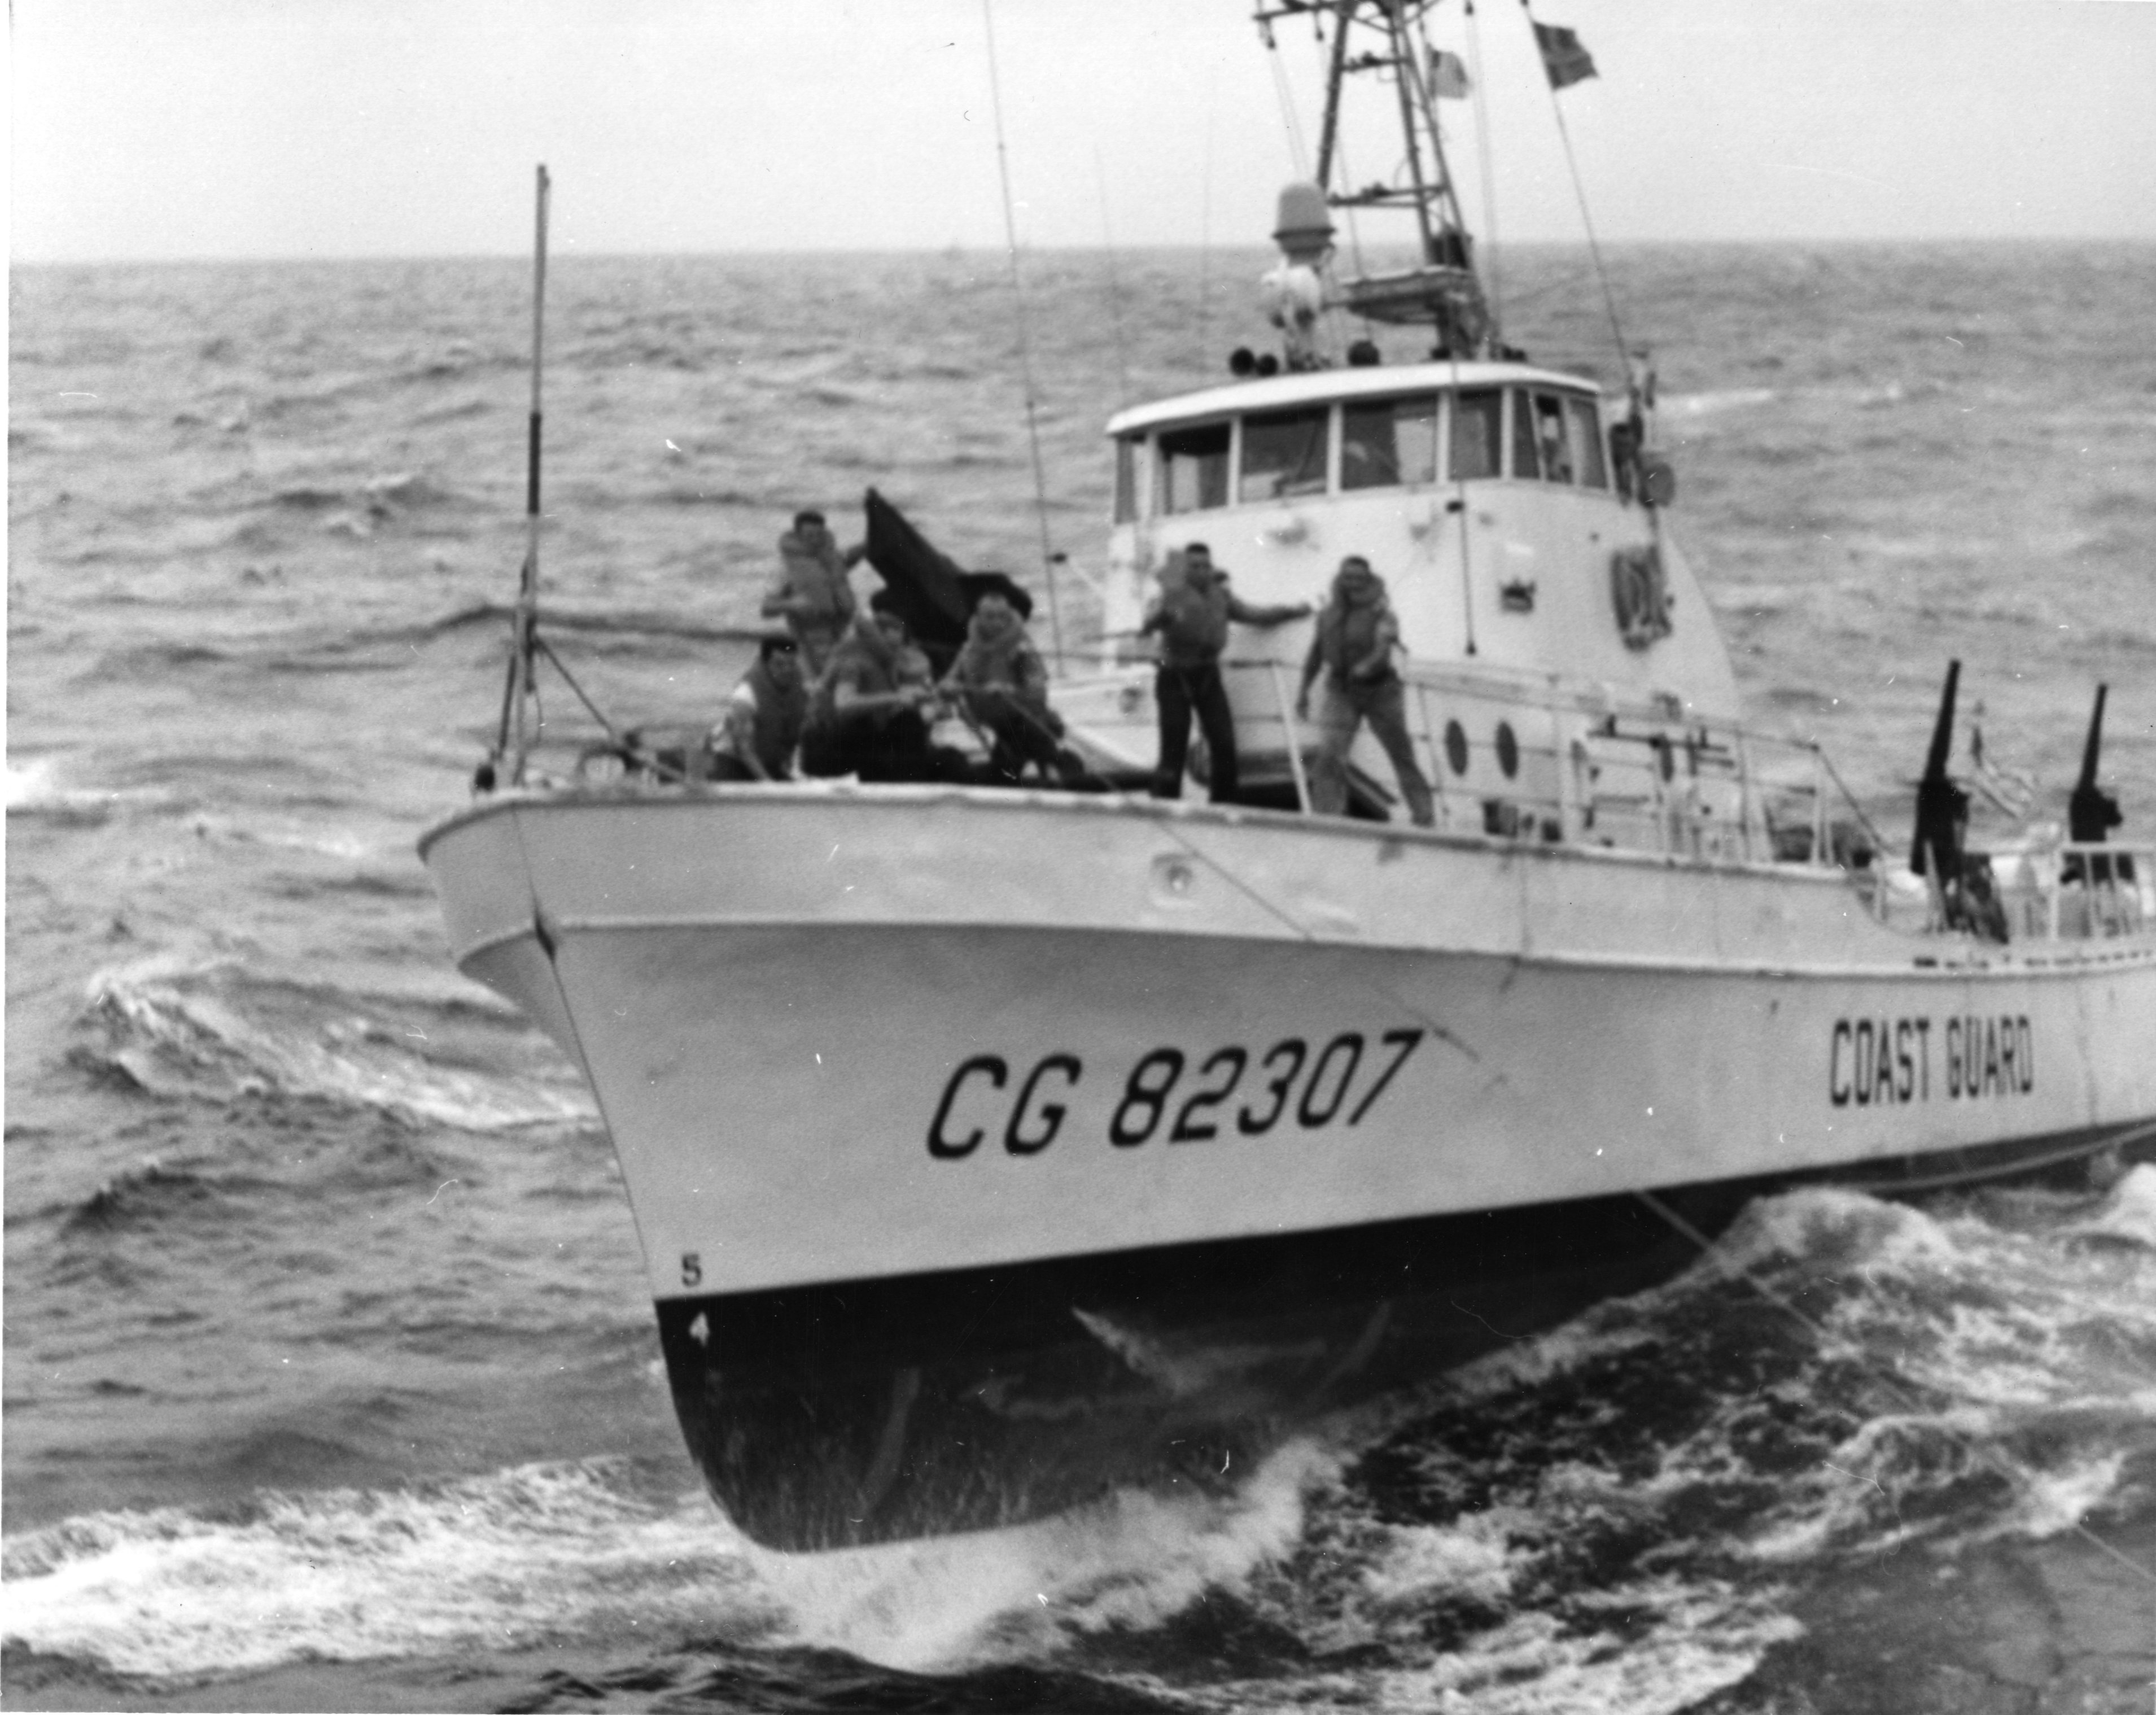 One of the Coast Guard's 82-foot Patrol Cutters